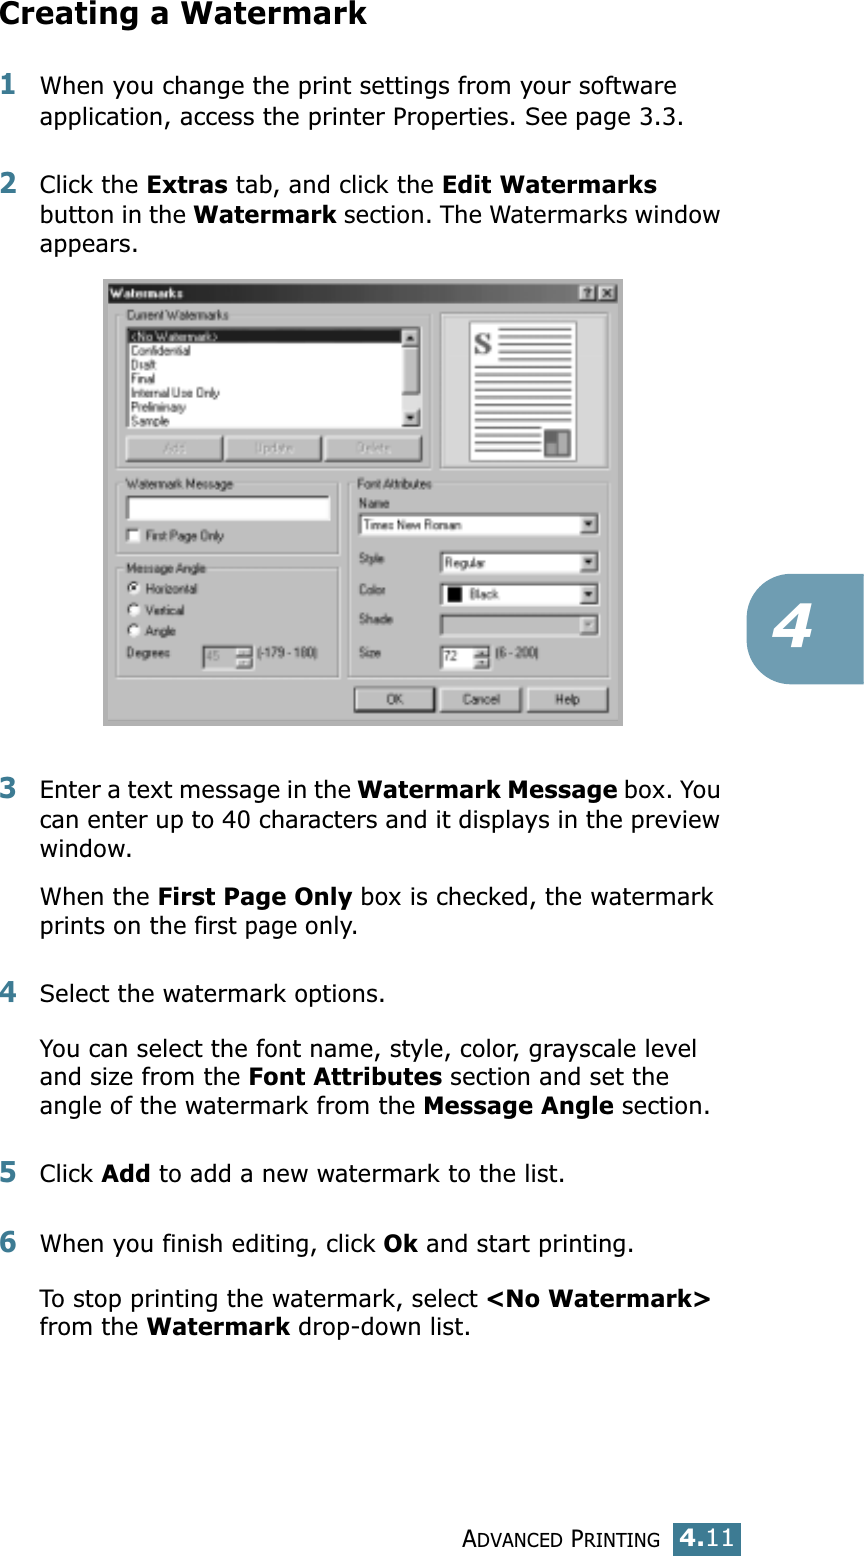 ADVANCED PRINTING4.114Creating a Watermark1When you change the print settings from your software application, access the printer Properties. See page 3.3. 2Click the Extras tab, and click the Edit Watermarks button in the Watermark section. The Watermarks window appears. 3Enter a text message in the Watermark Message box. You can enter up to 40 characters and it displays in the preview window.When the First Page Only box is checked, the watermark prints on the first page only.4Select the watermark options. You can select the font name, style, color, grayscale level and size from the Font Attributes section and set the angle of the watermark from the Message Angle section. 5Click Add to add a new watermark to the list. 6When you finish editing, click Ok and start printing. To stop printing the watermark, select &lt;No Watermark&gt; from the Watermark drop-down list. 